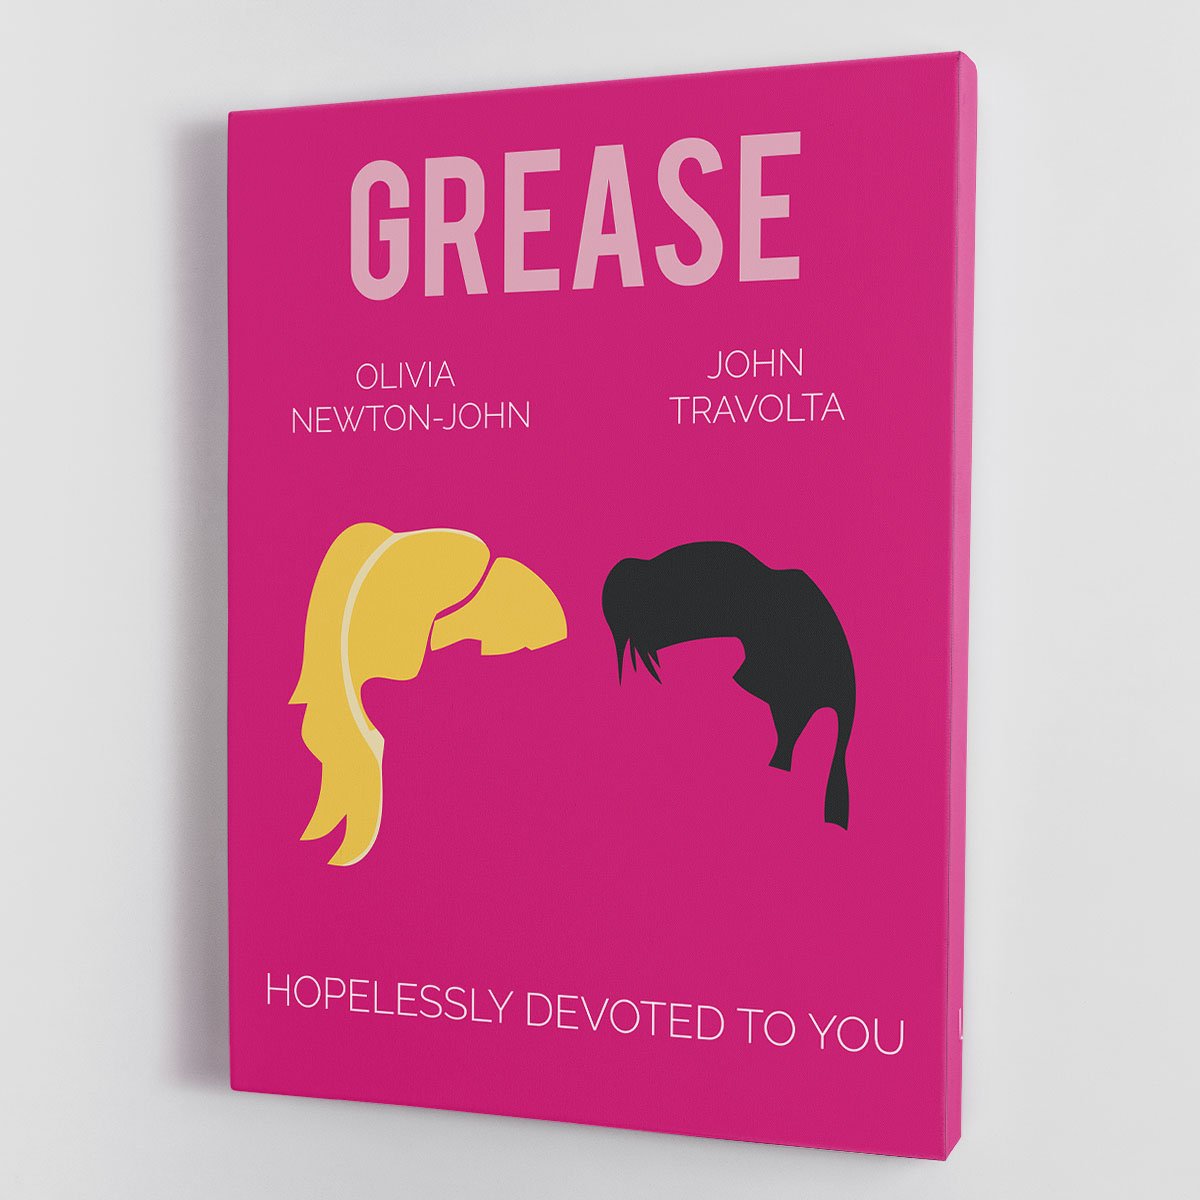 Grease Minimal Movie Canvas Print or Poster